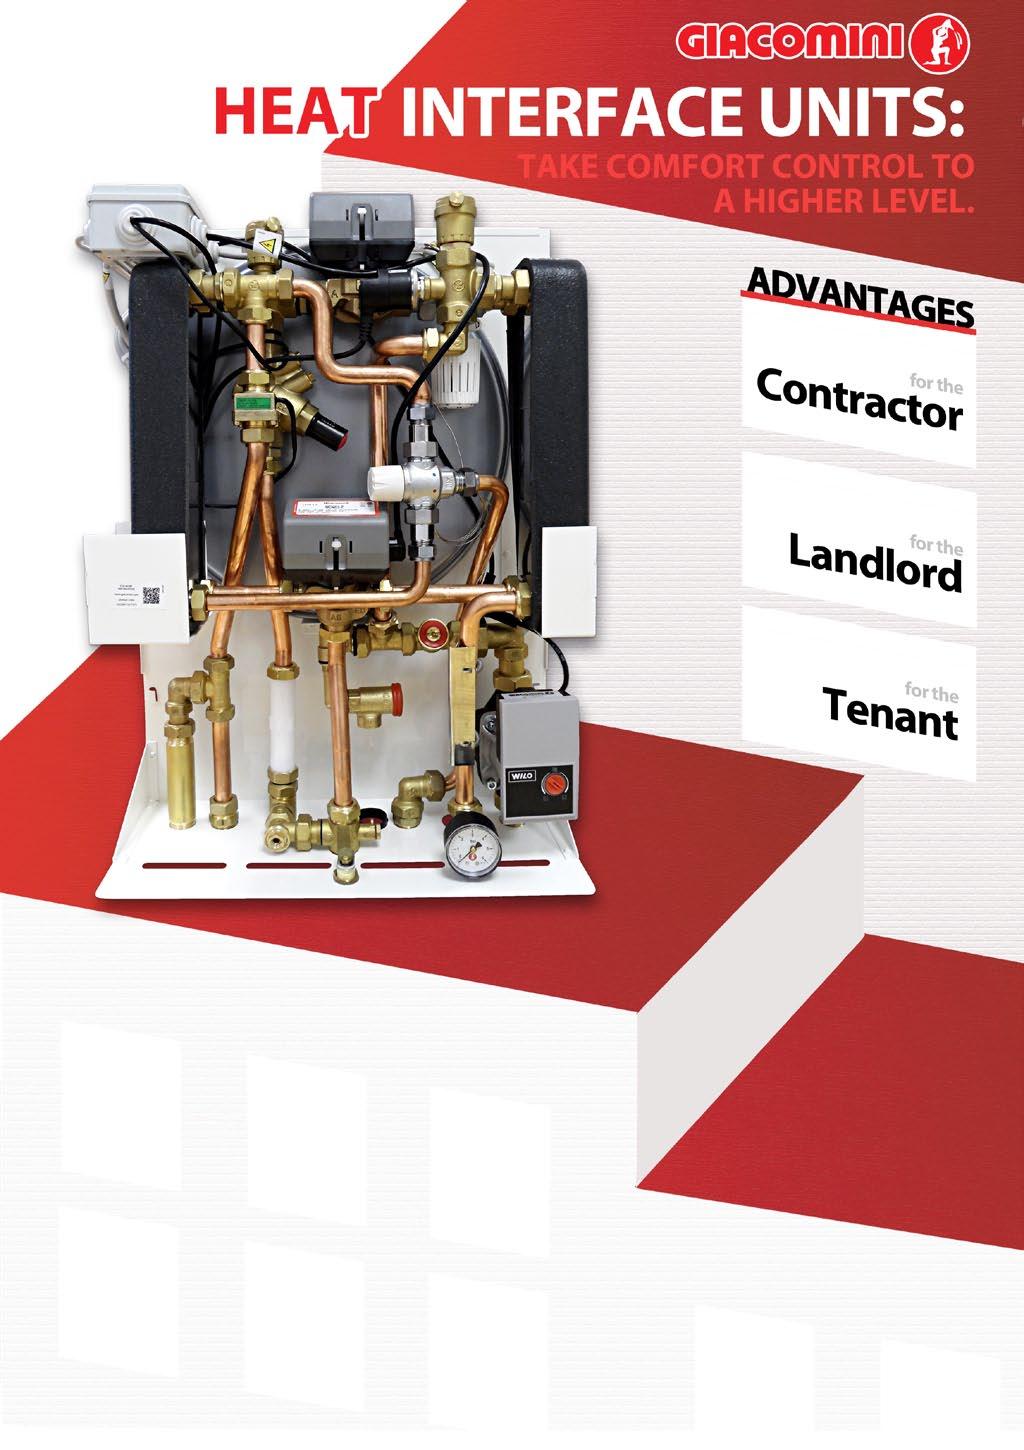 Advantages for: The Contractor Simplicity of installation no gas supply, no flues and no cylinders.